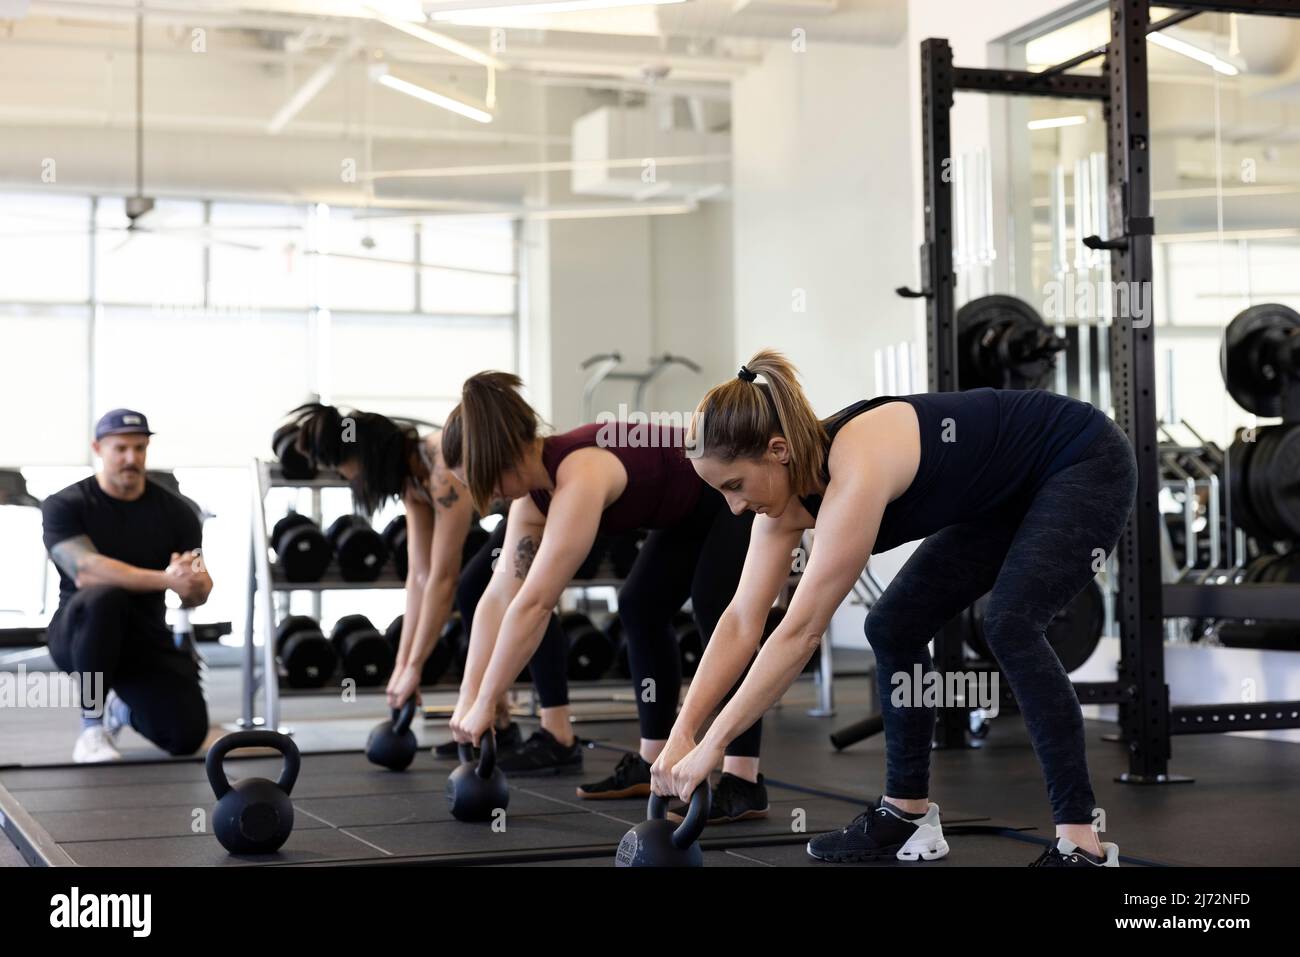 Three woman in a row bent over doing kettlebell exercise while personal trainer looks on in background. Stock Photo